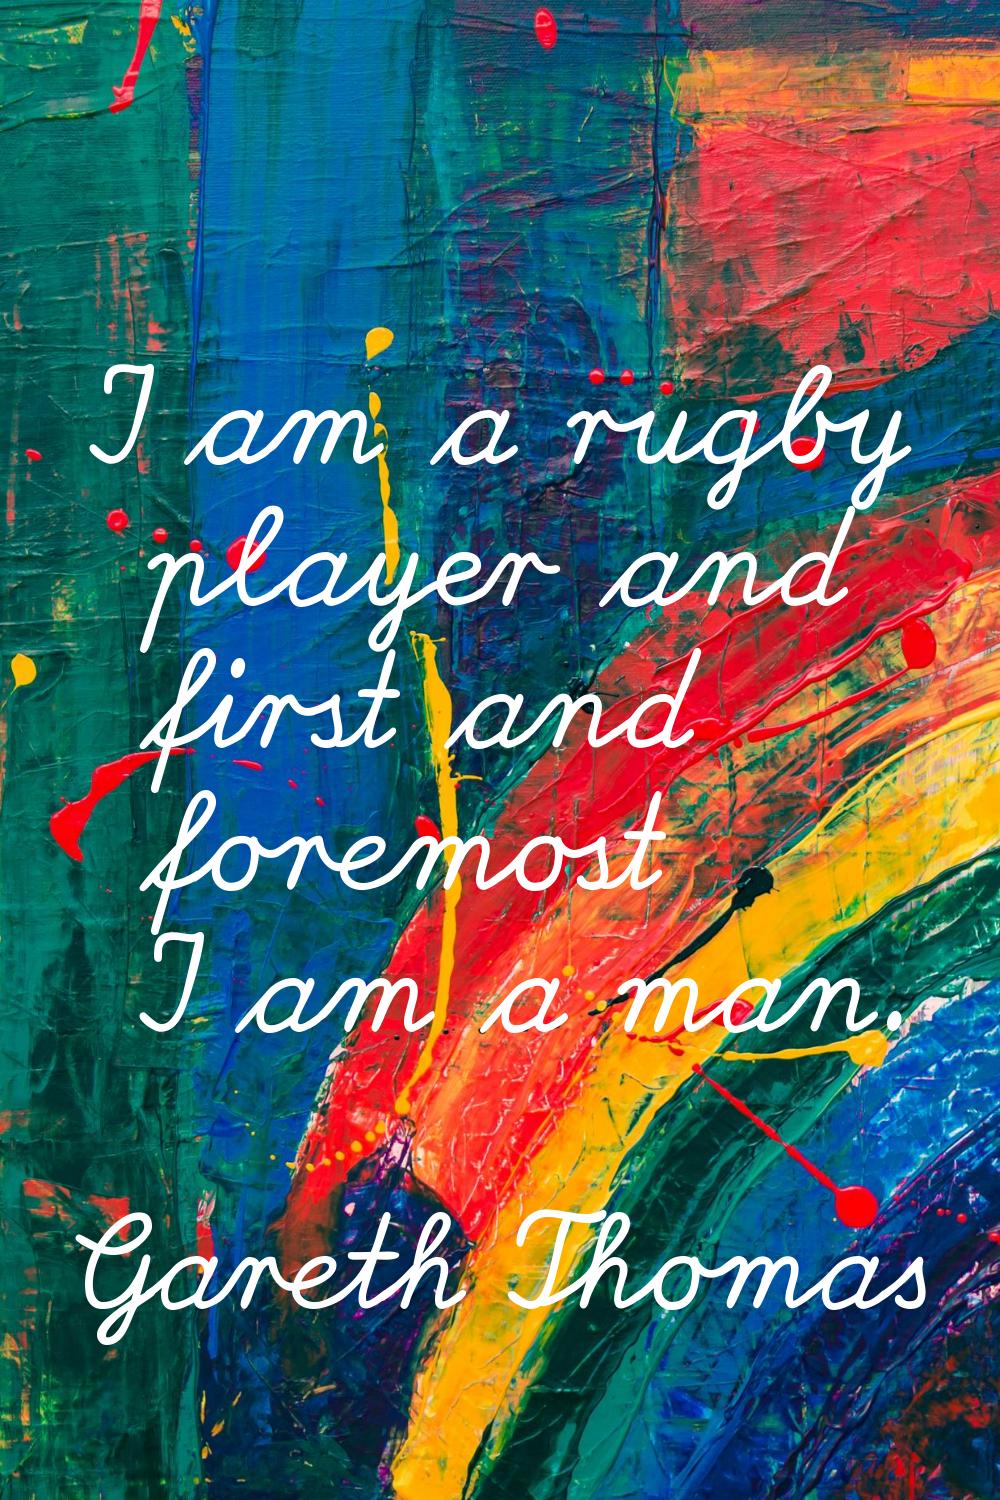 I am a rugby player and first and foremost I am a man.